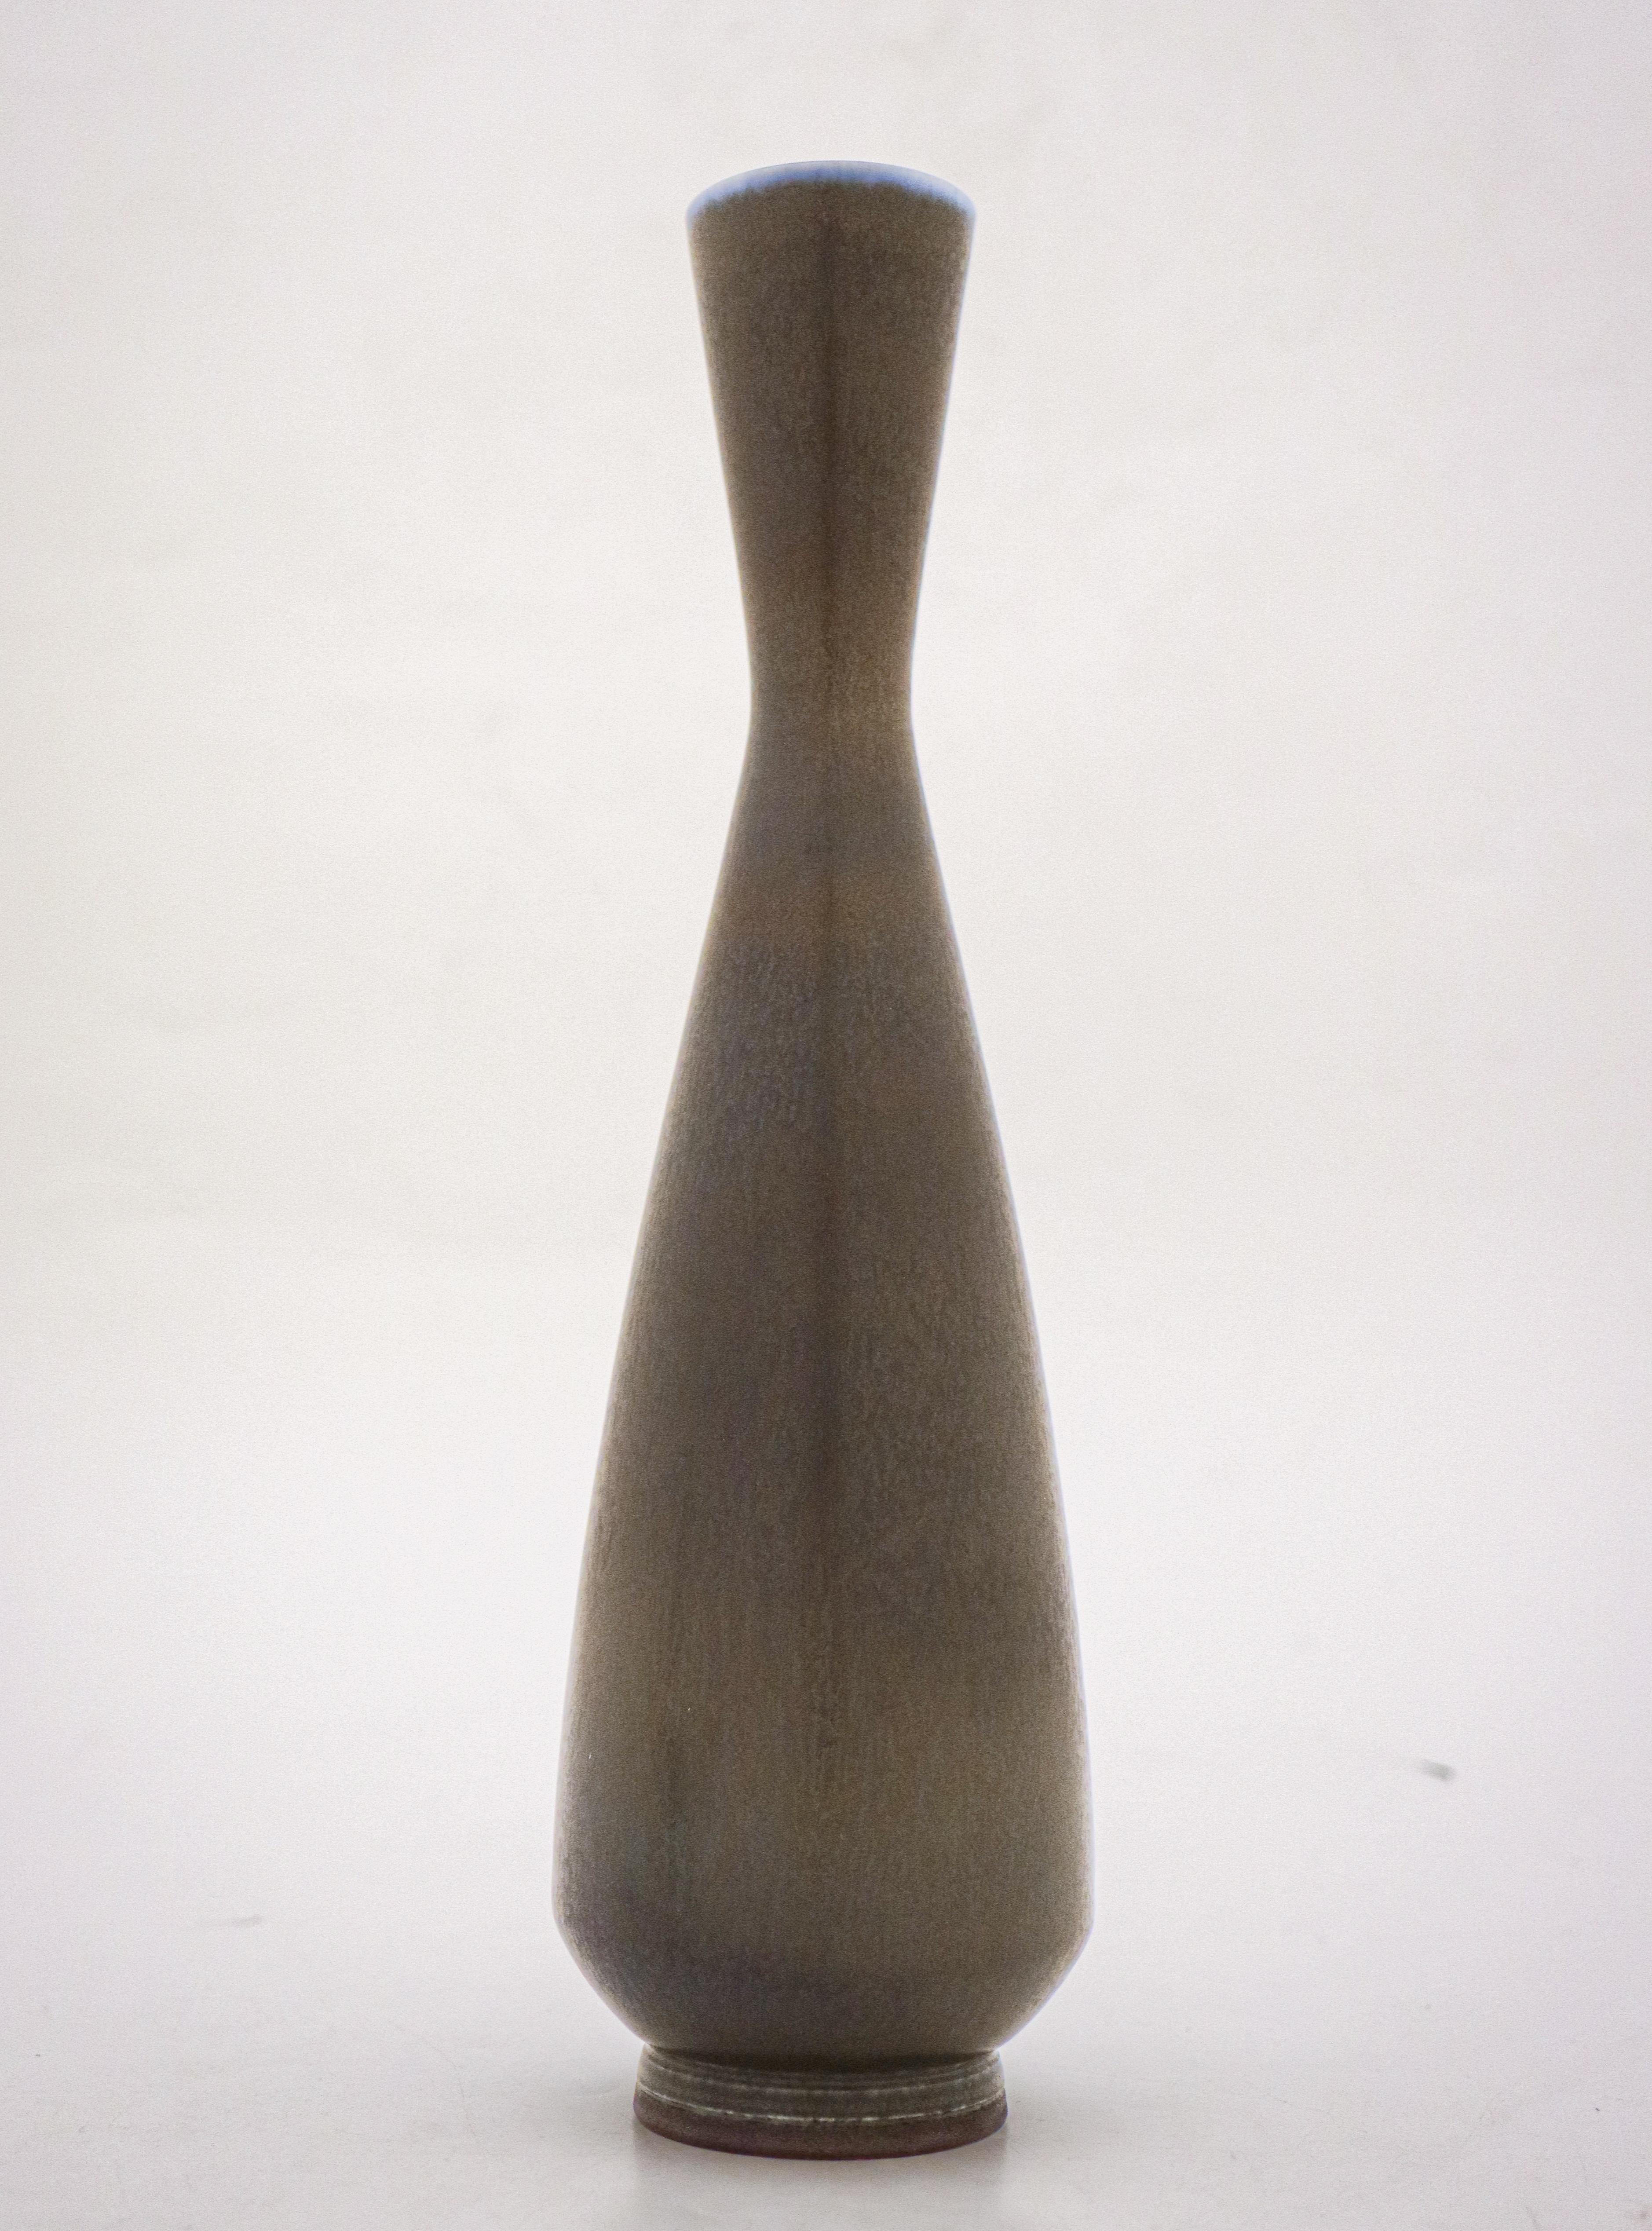 A lovely vase with a brown & blue har fur glaze designed by Berndt Friberg at Gustavsberg in Stockholm, the vase is 27 cm high. It's marked as on picture and was made in 1962. It is in very good condition except from some minor marks.